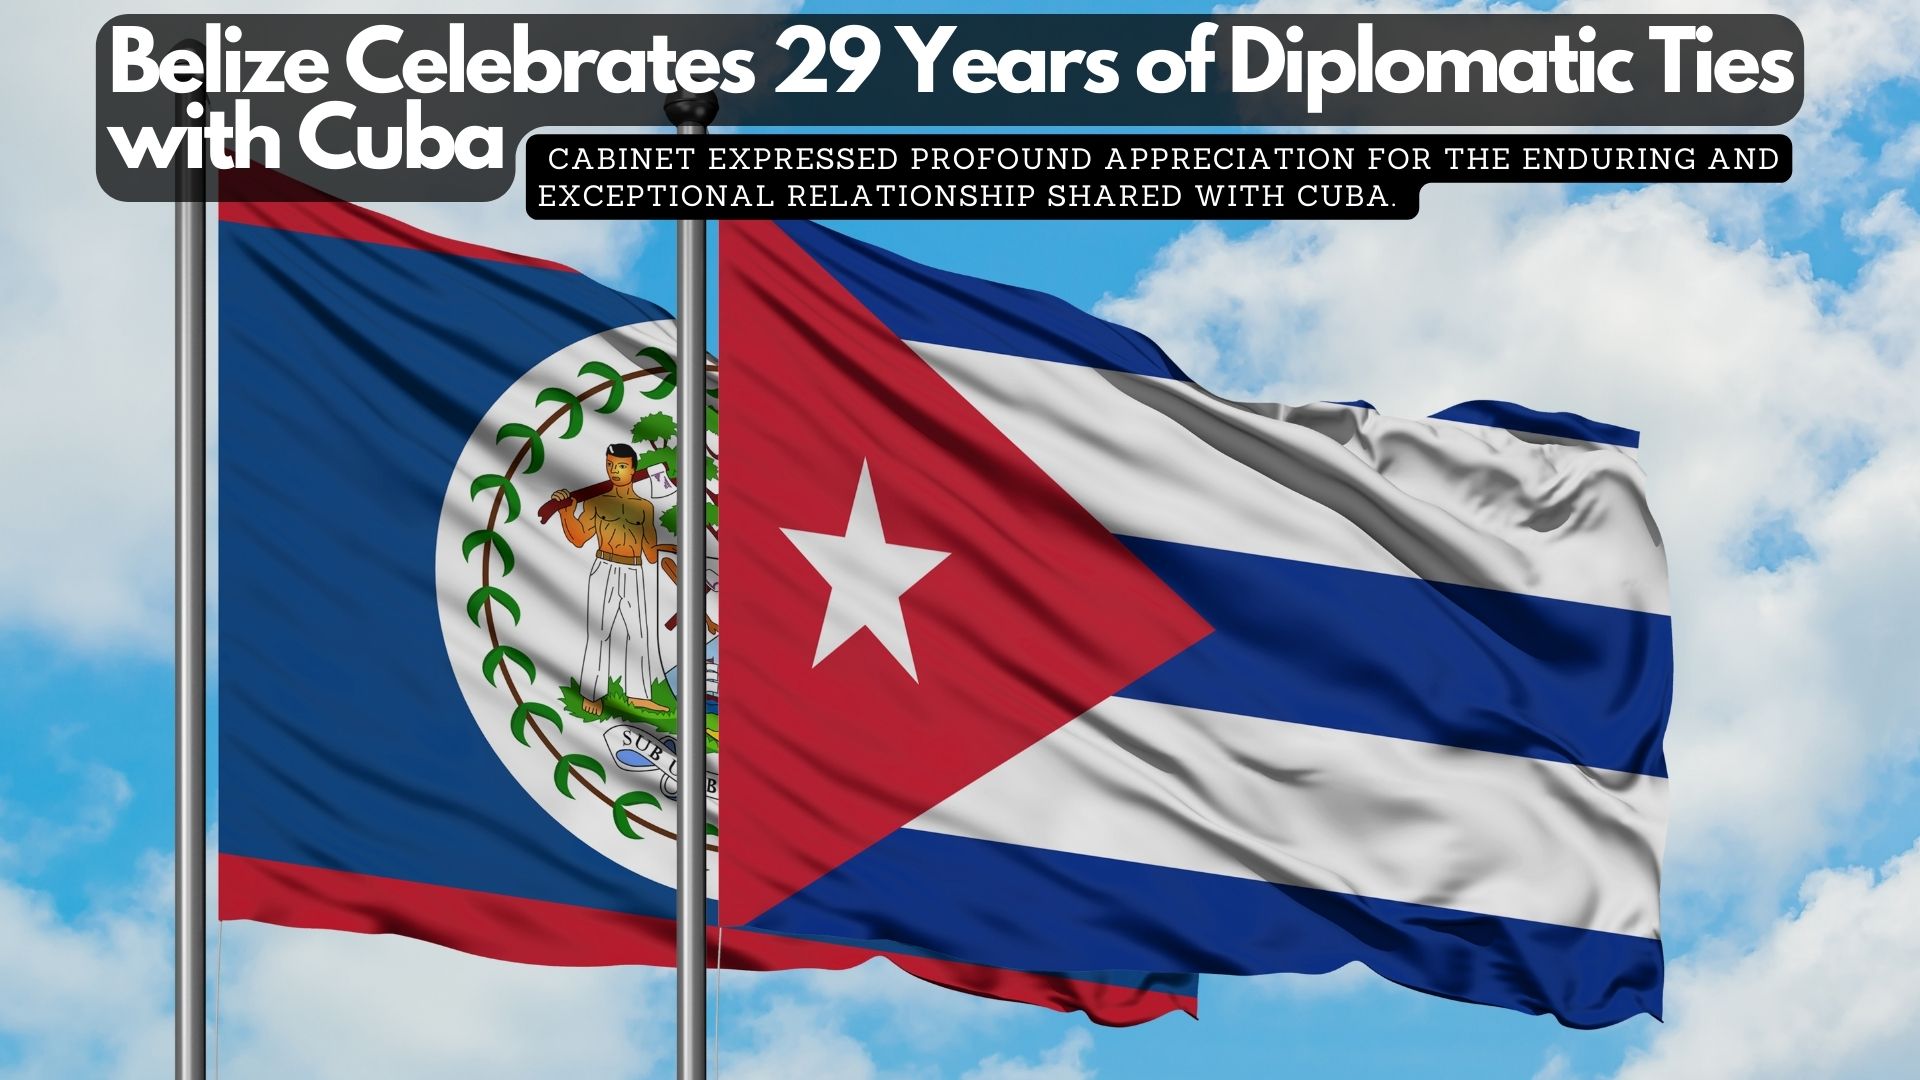 Belize Celebrates 29 Years of Diplomatic Ties with Cuba